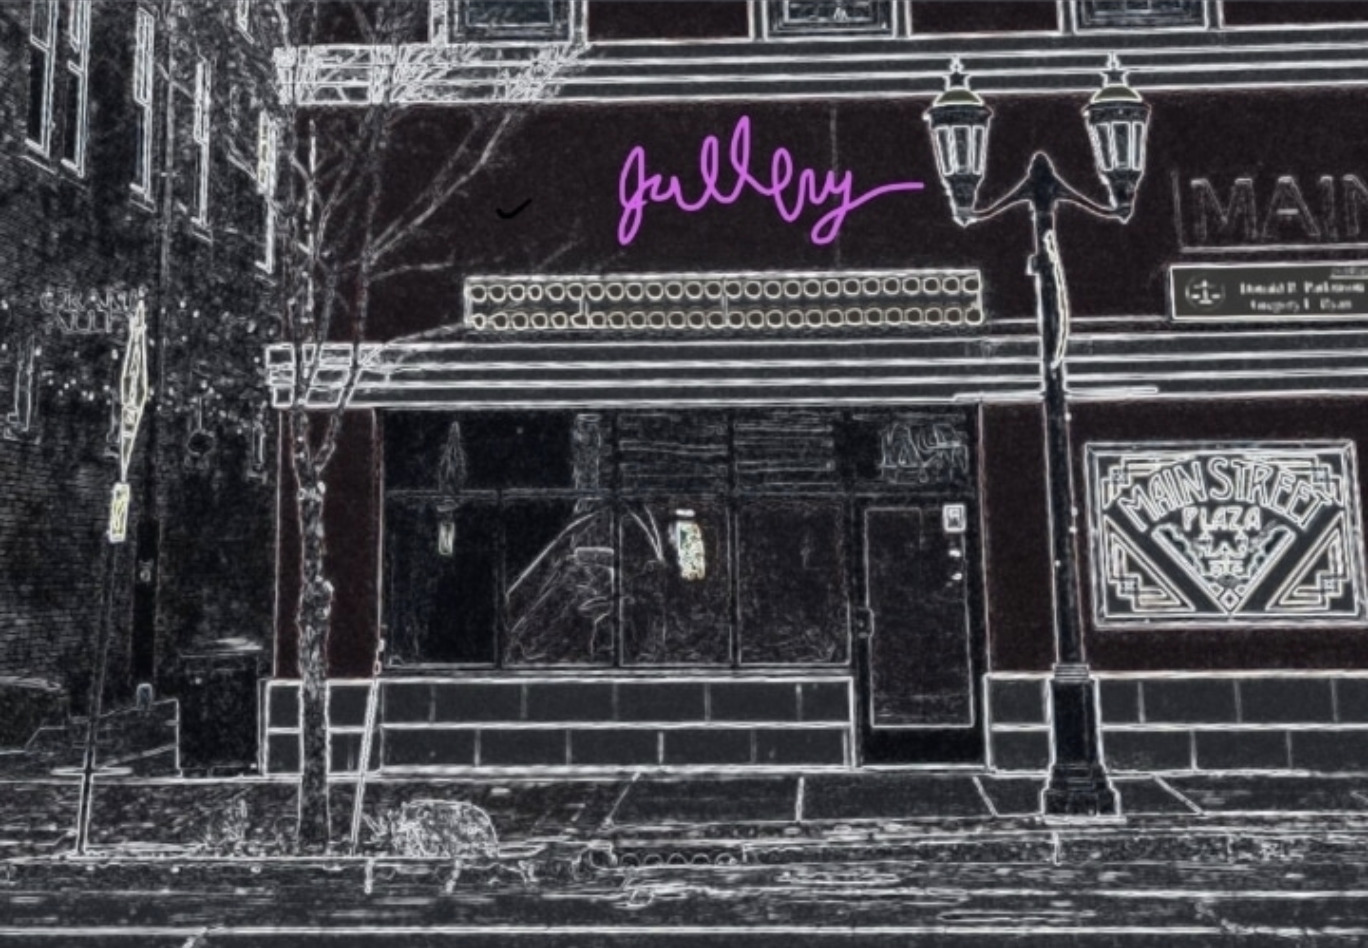 A black and white rendering of the exterior of 119 W Main St, Urbana, with a hot pink "gallery" sign in script above the door.